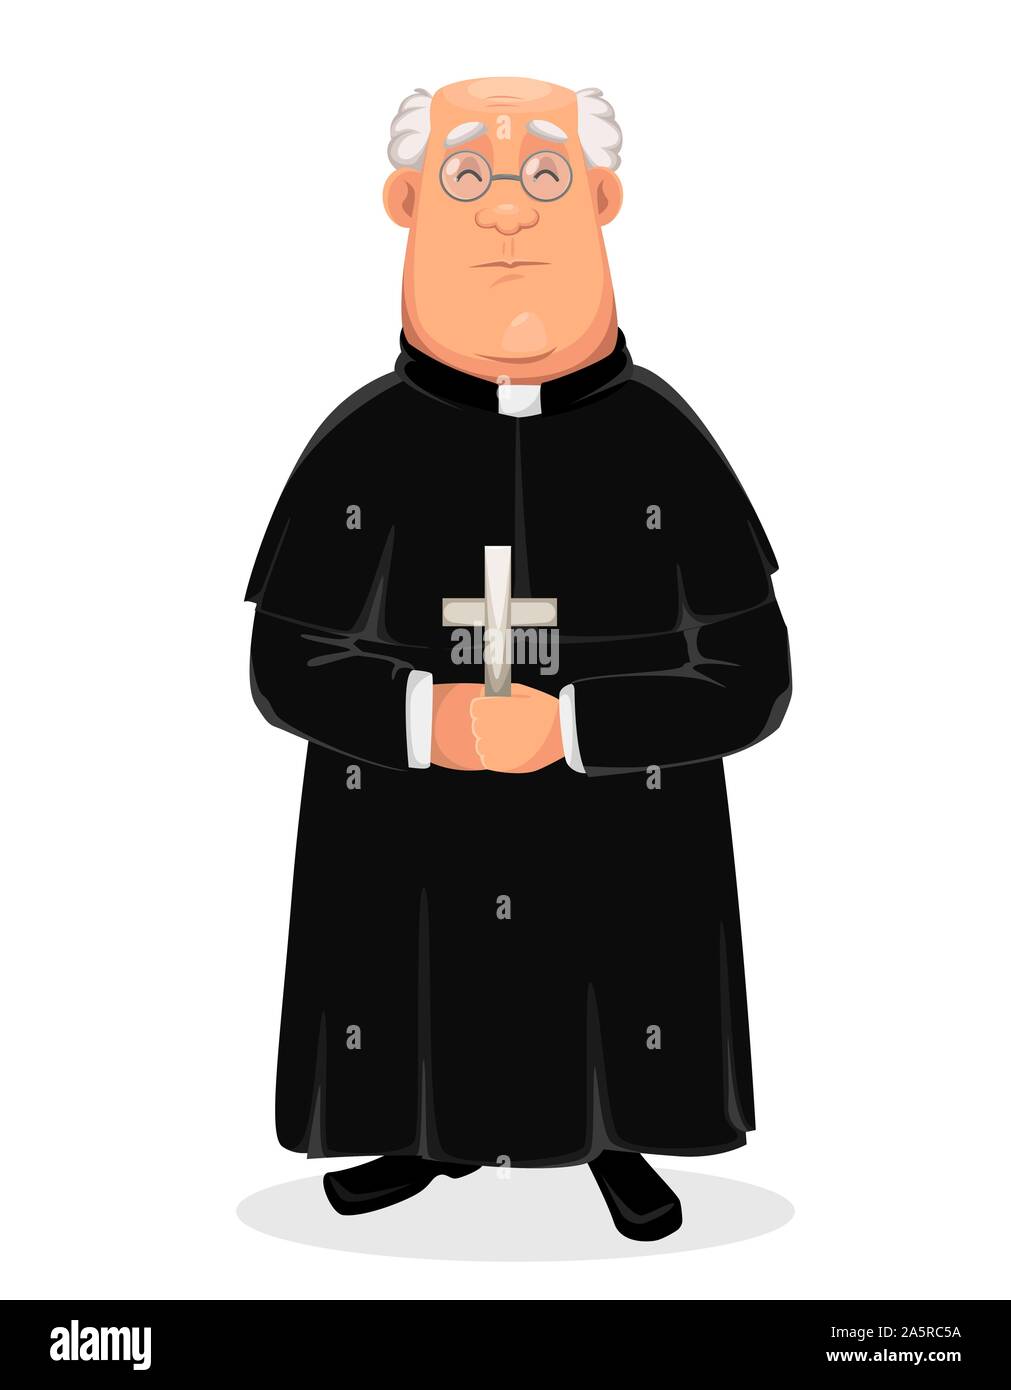 Priest cartoon character. Holy Father standing with cross in hands. Vector illustration on white background. Stock Vector